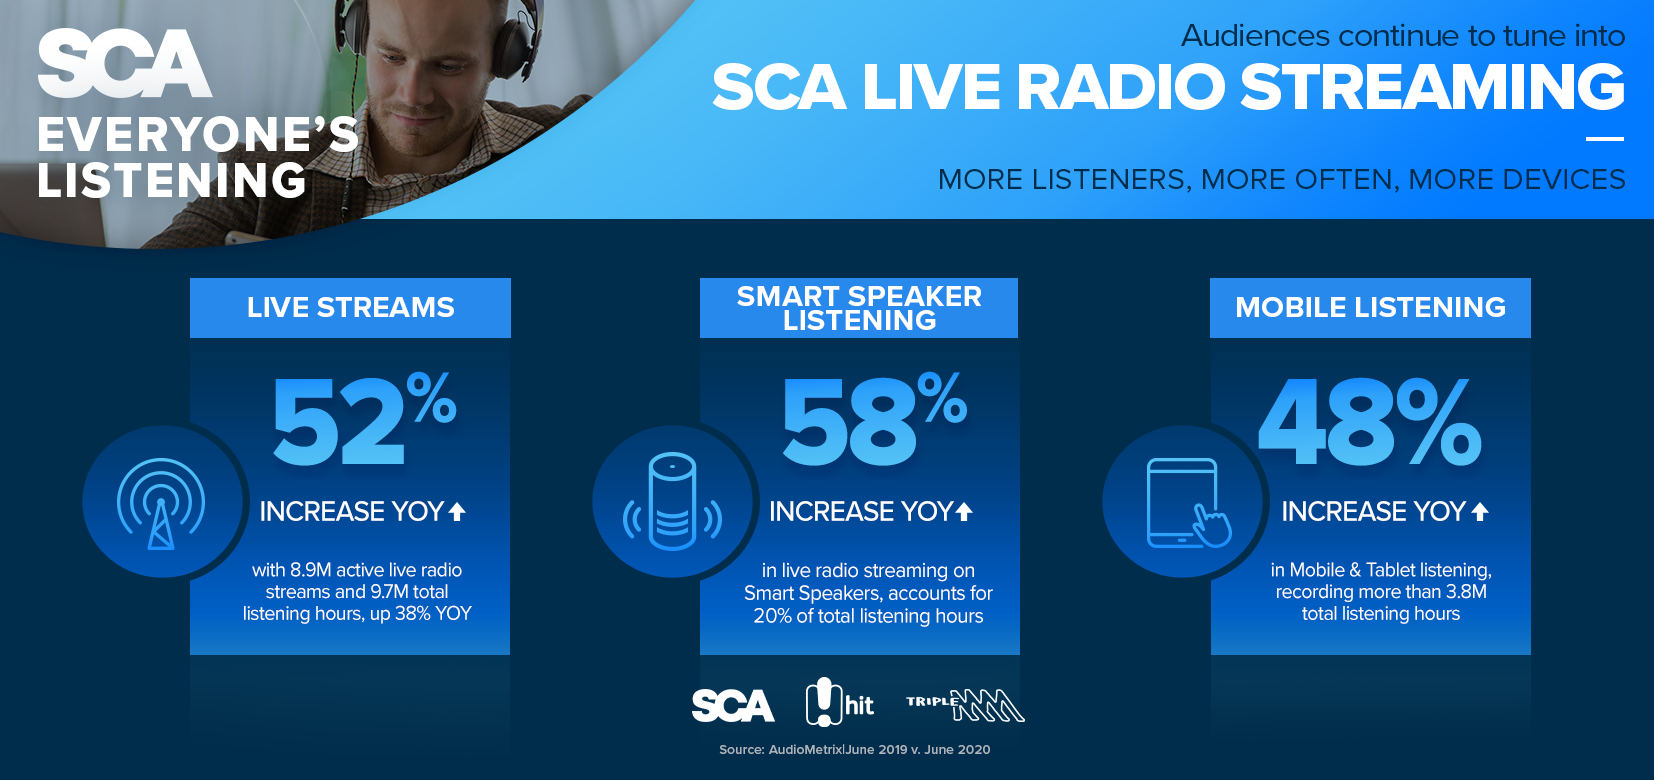 SCAs LIVE RADIO STREAMING AUDIENCE UP 35% YEAR ON YEAR Southern Cross Austereo